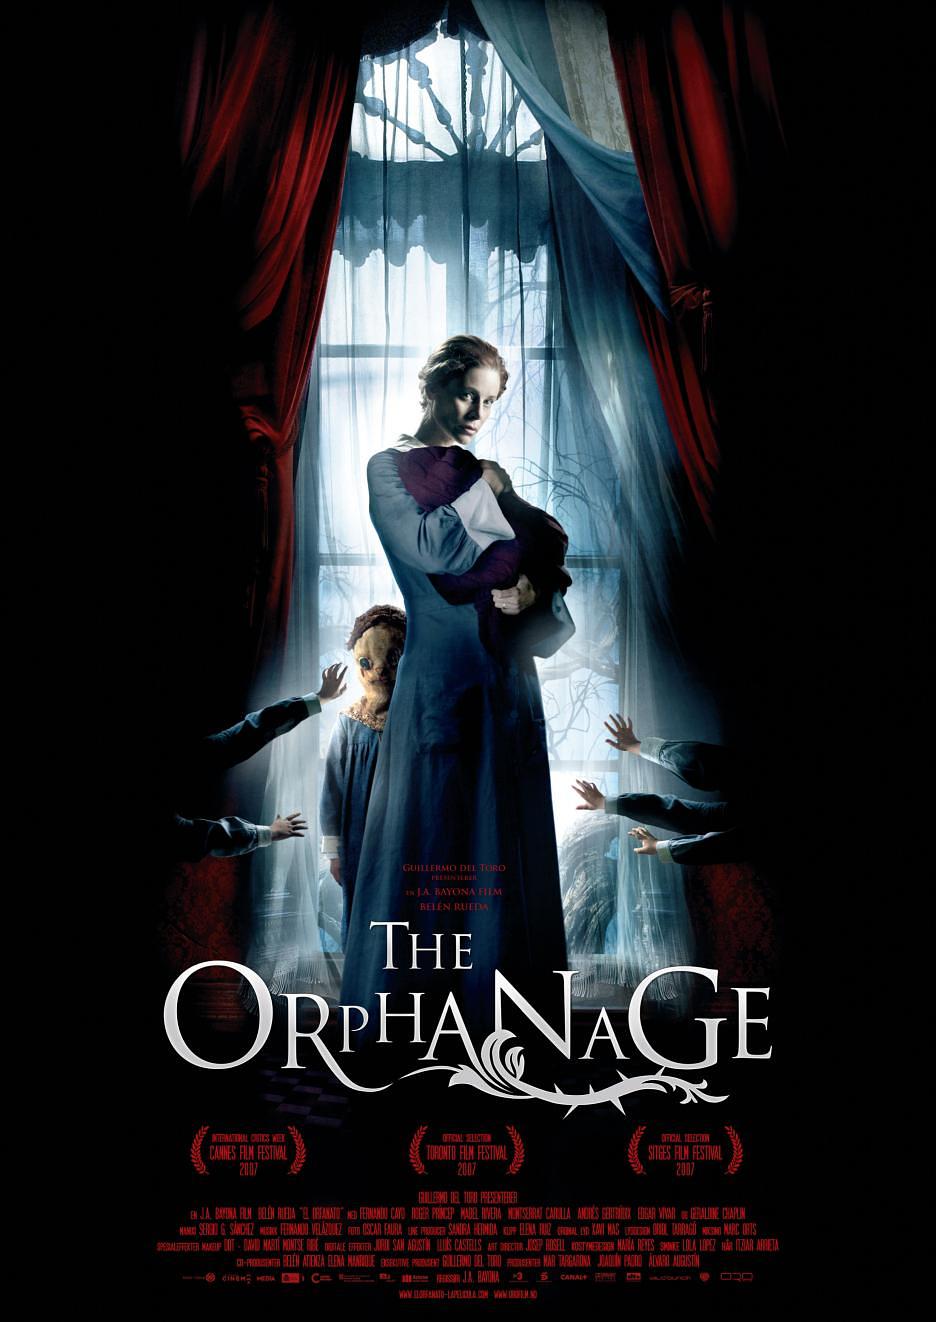 ± The.Orphanage.2007.SPANISH.1080p.BluRay.x264.DTS-FGT 7.94GB-1.png